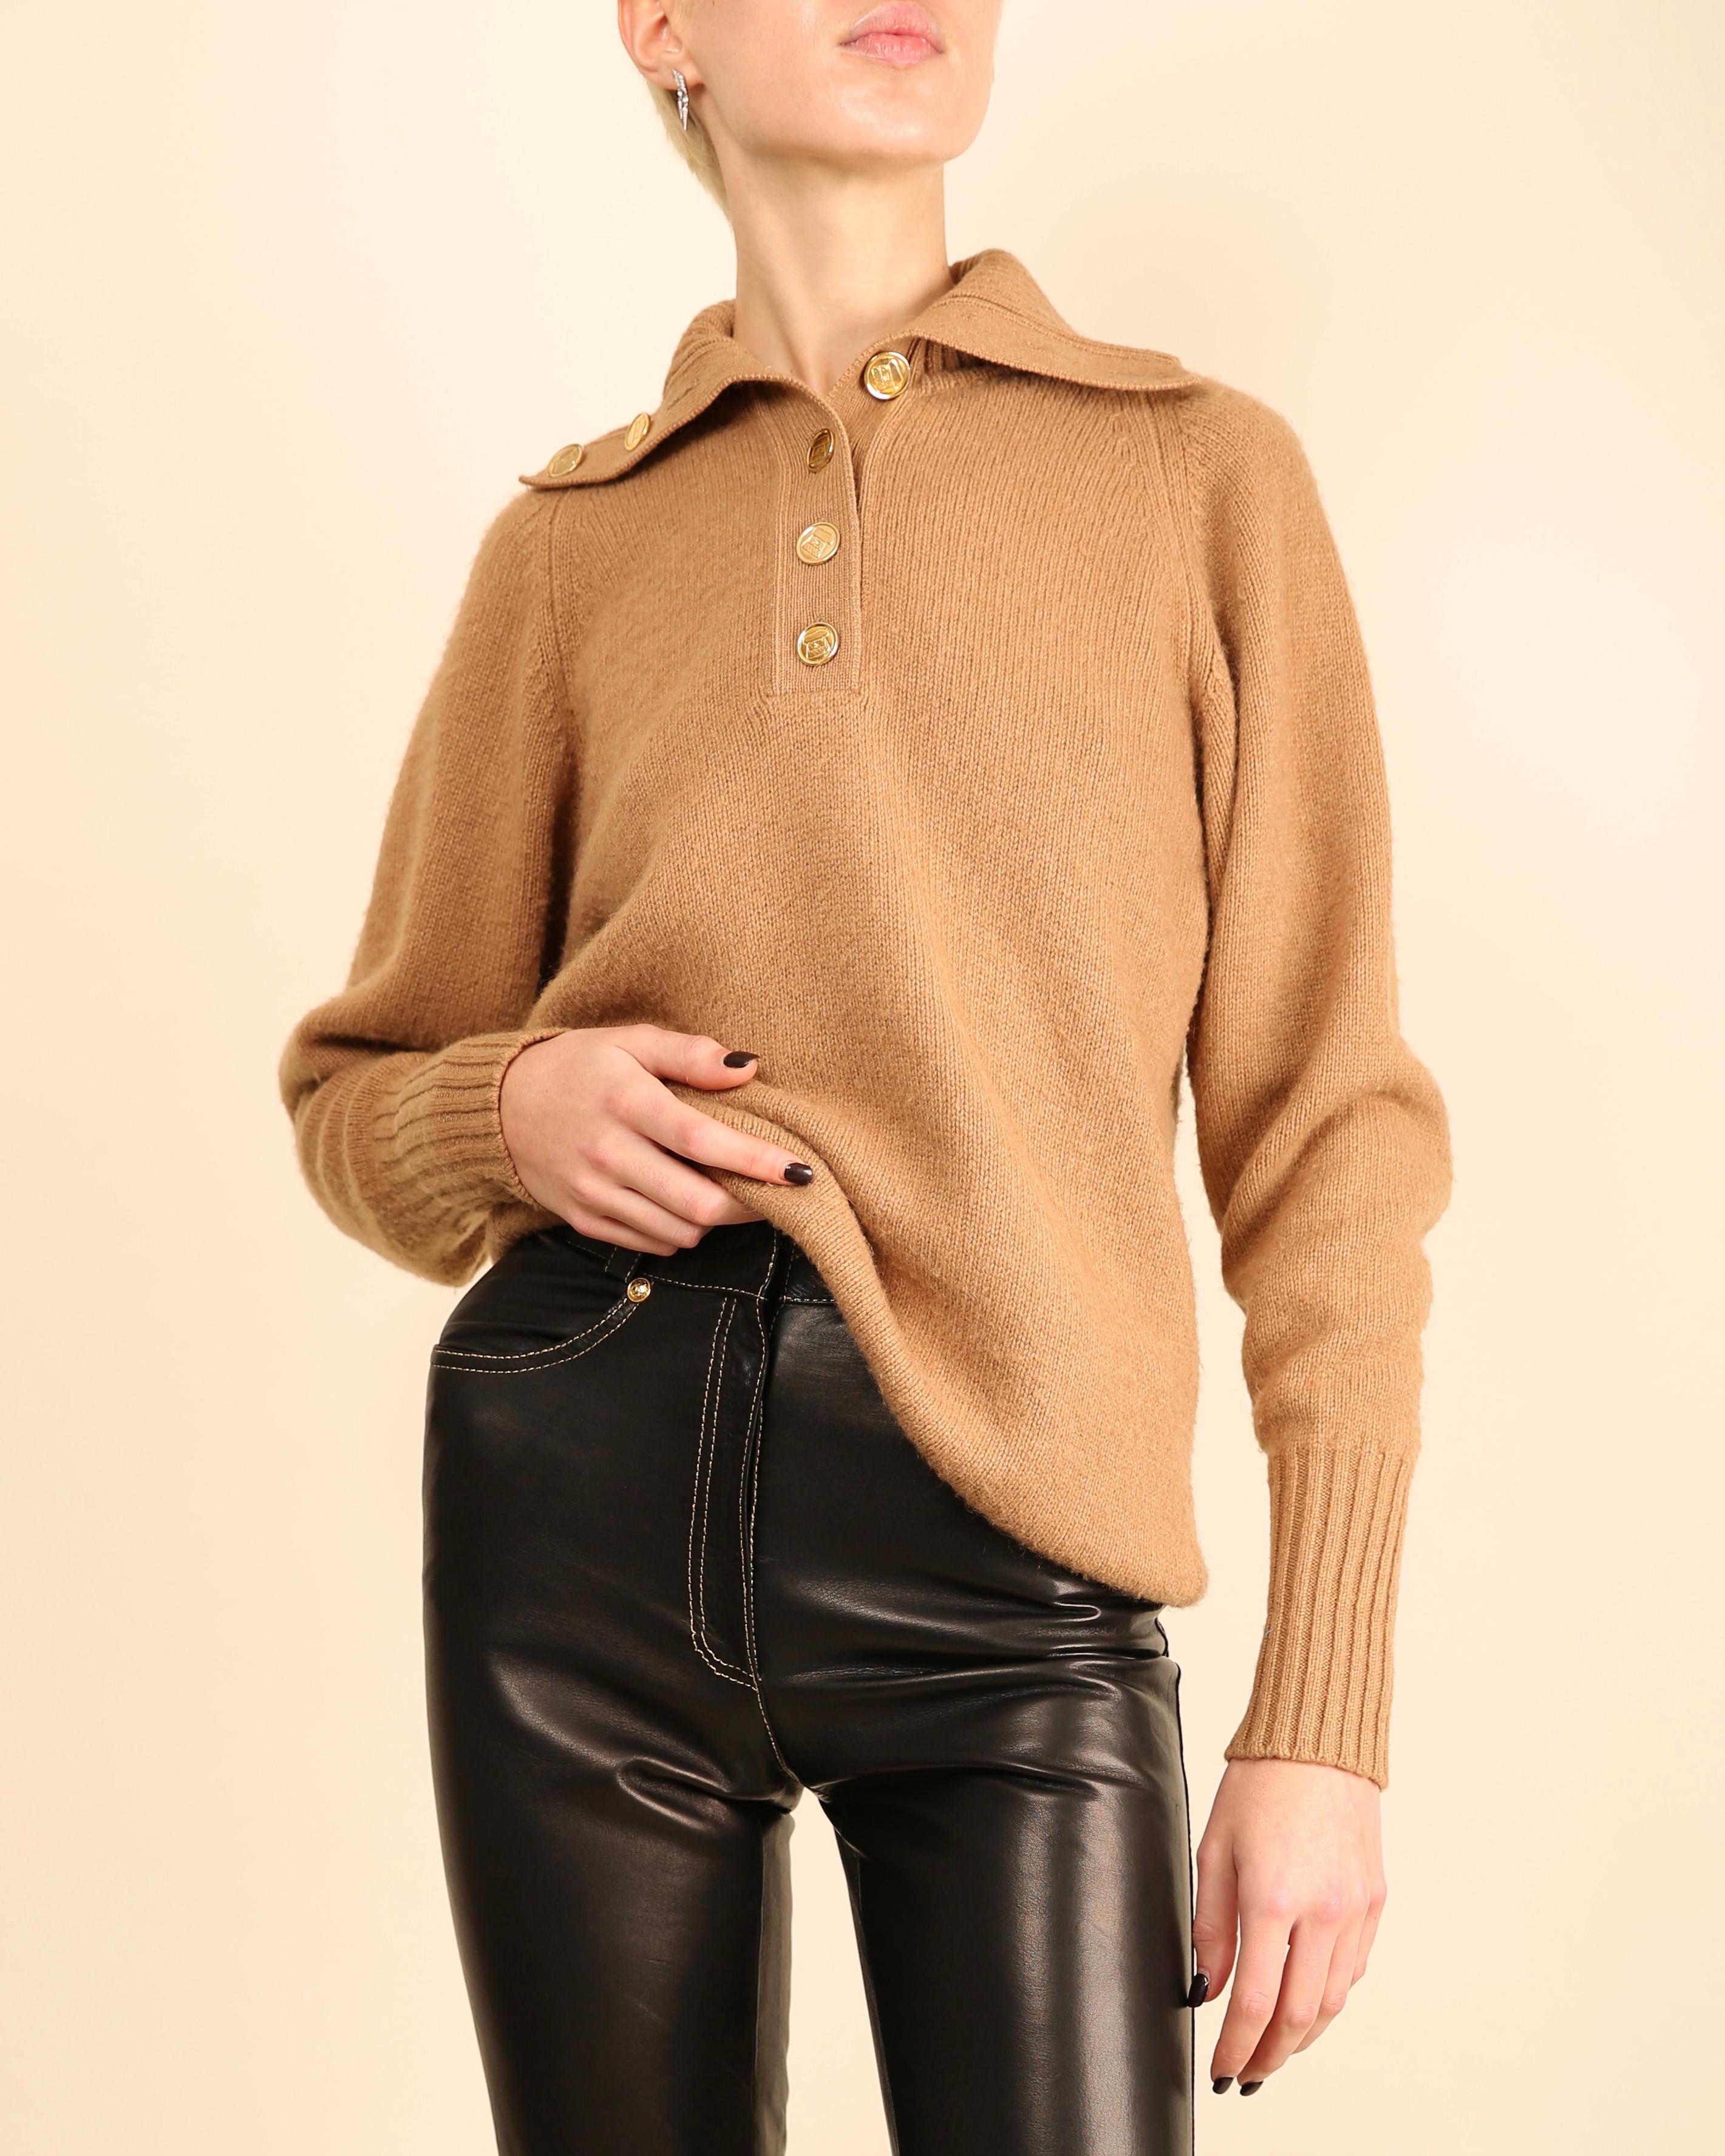 LOVE LALI Vintage

Chanel vintage cashmere oversized sweater in camel
Beautiful oversized gold buttons engraved with a Chanel handbag with a CC logo
Open turtleneck style collar that can be worn undone or fully buttoned 
Ribbed collar, hemline and